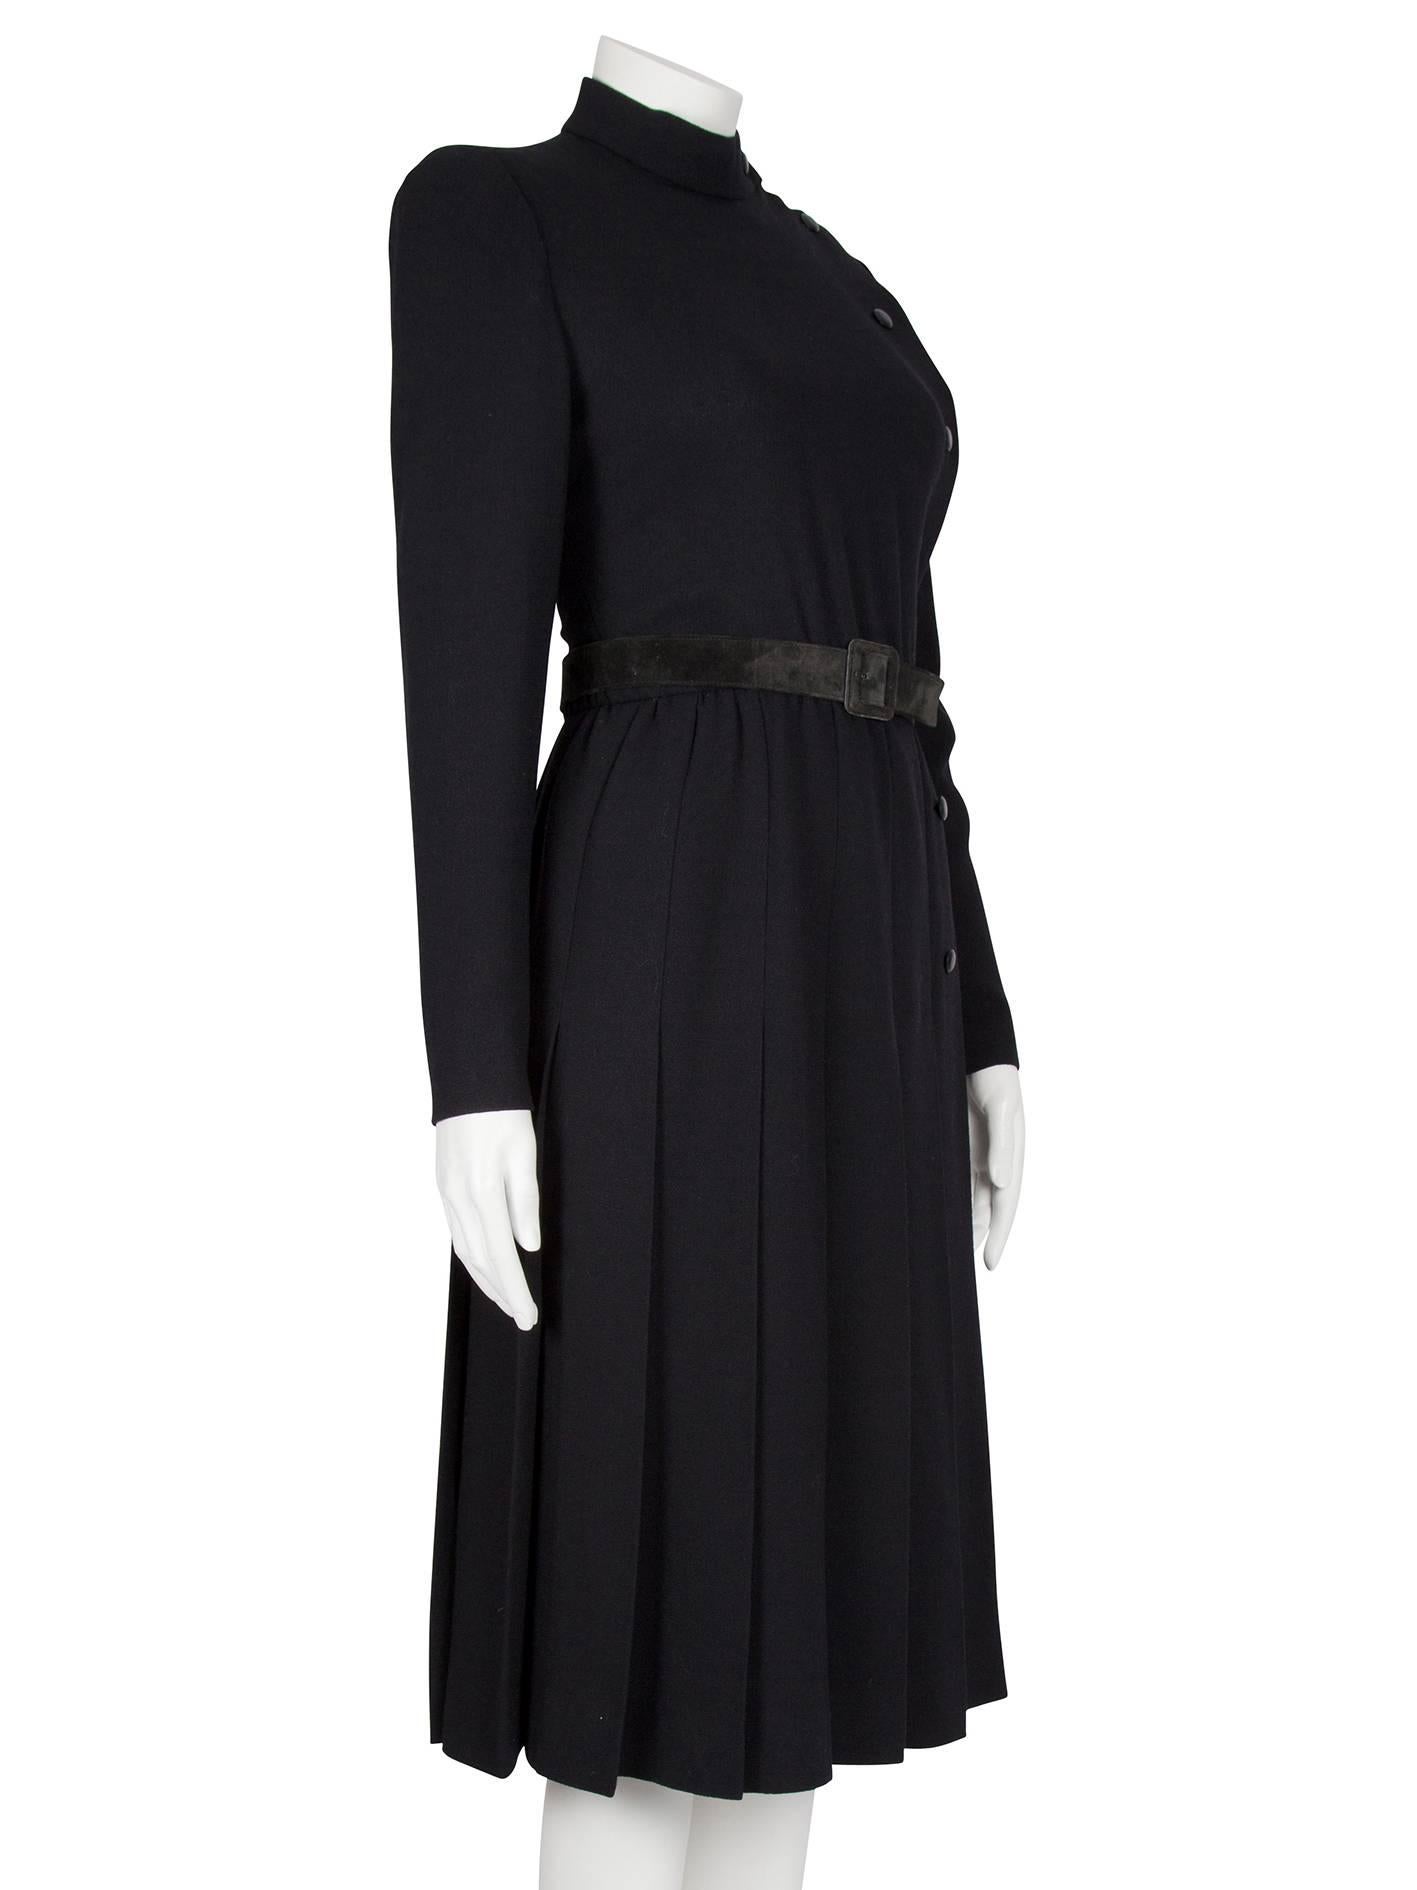 A Dior Couture black silk crepe long-sleeved button-down dress from the Autumn/Winter 1979 collection. The mid-length wrap dress features a pleated skirt and long sleeves with buttoned cuffs and the fabric has a pleasing weight. The dress fastens